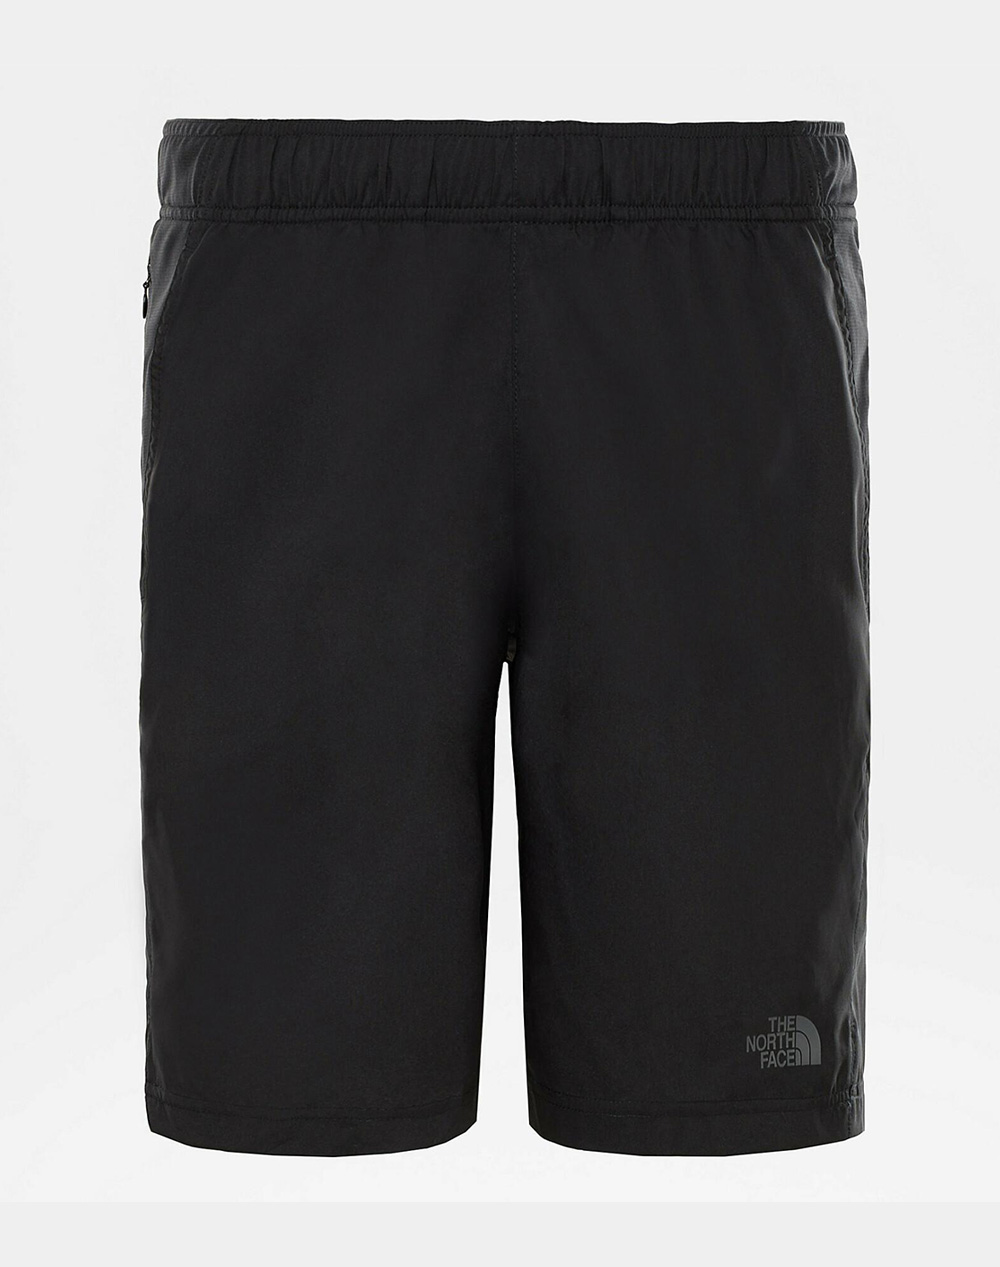 THE NORTH FACE M 24/7 7IN SHORT